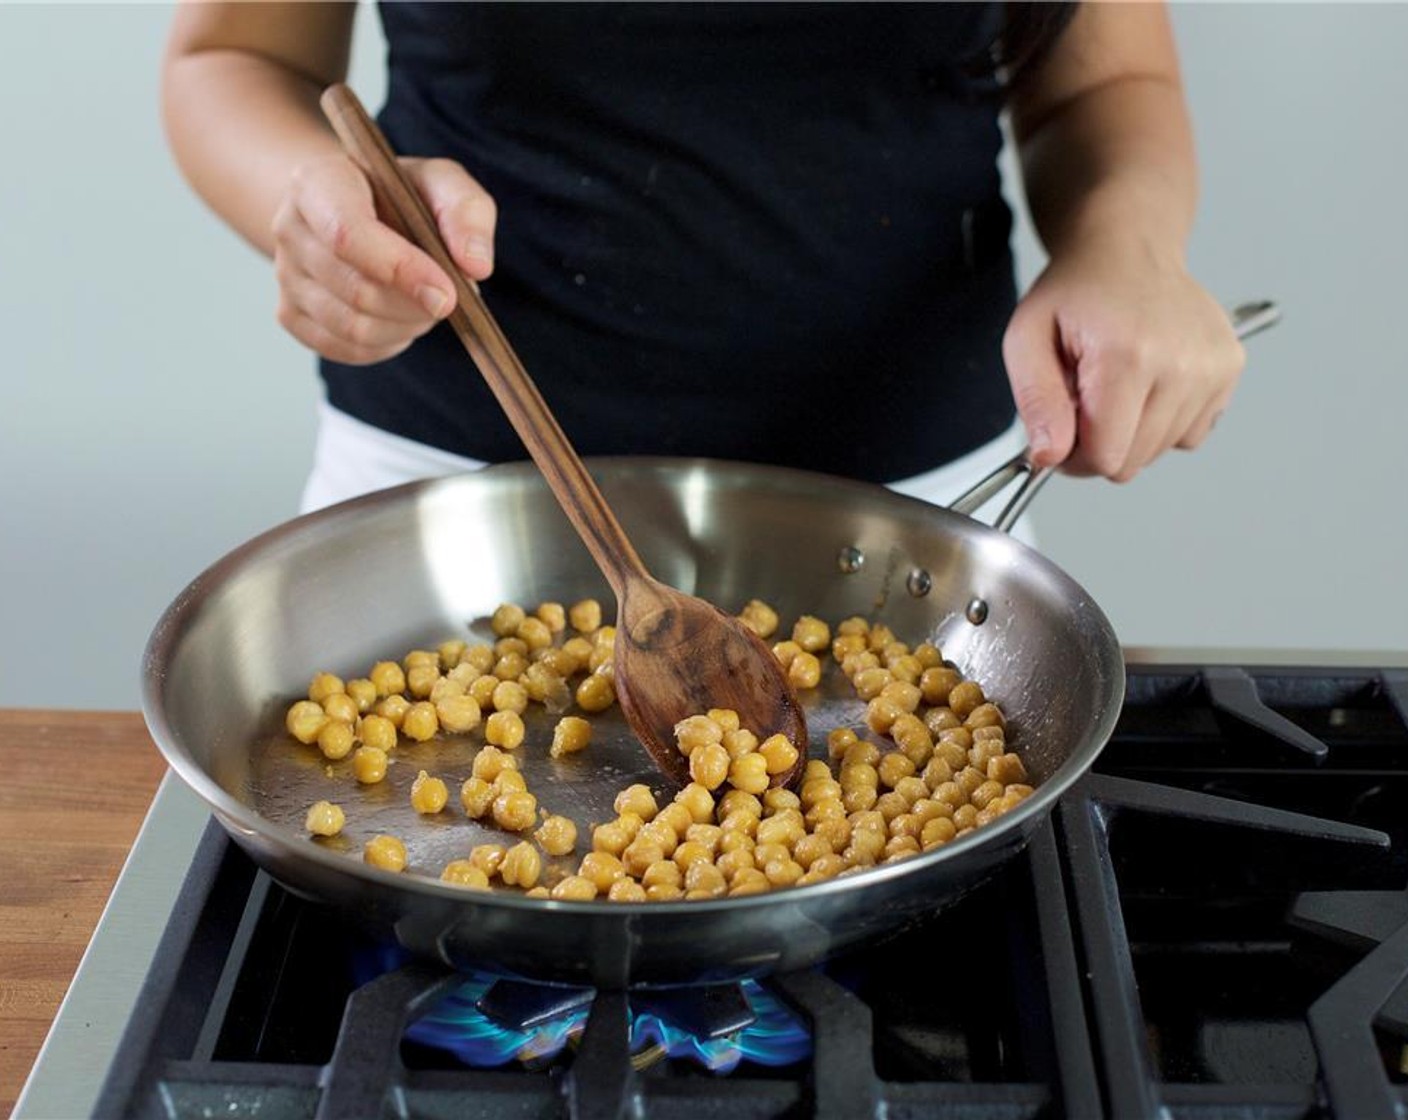 step 10 In a large saute pan over high heat, add one tablespoon of olive oil. Add the Chickpeas (1 can) and saute for 4 minutes until golden brown.